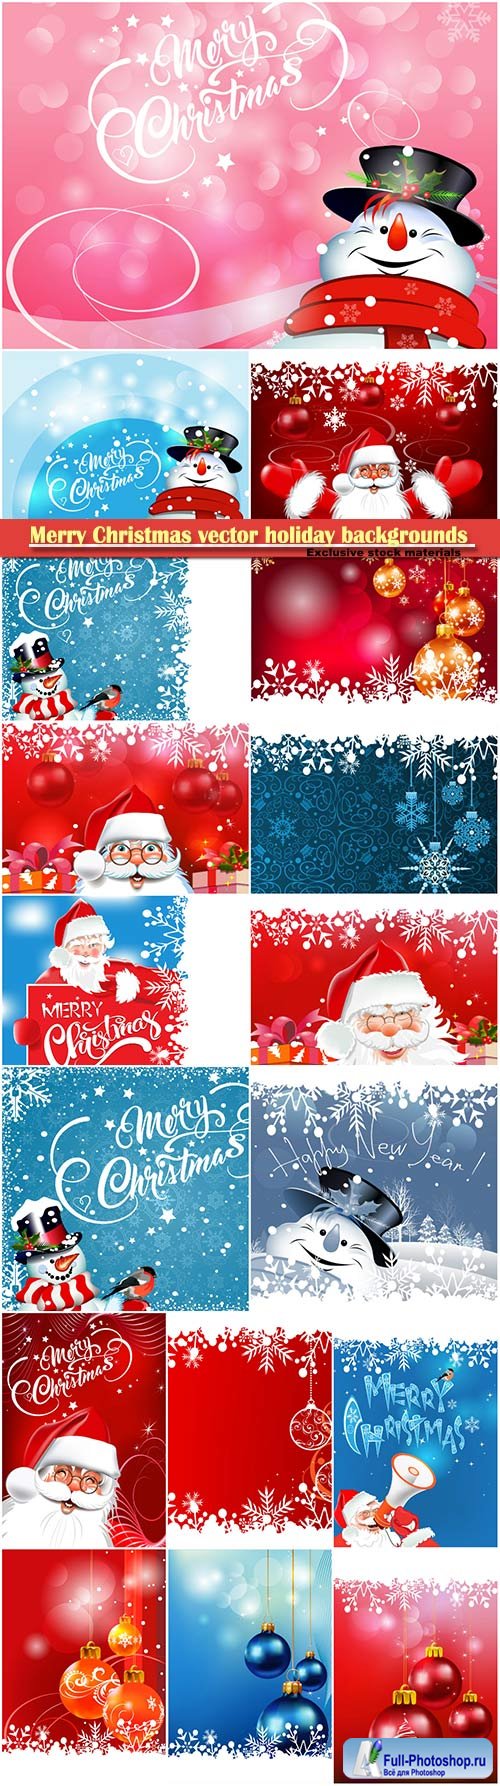 Christmas vector holiday backgrounds, Santa Claus, snowman, Christmas decorations and snowflakes # 5